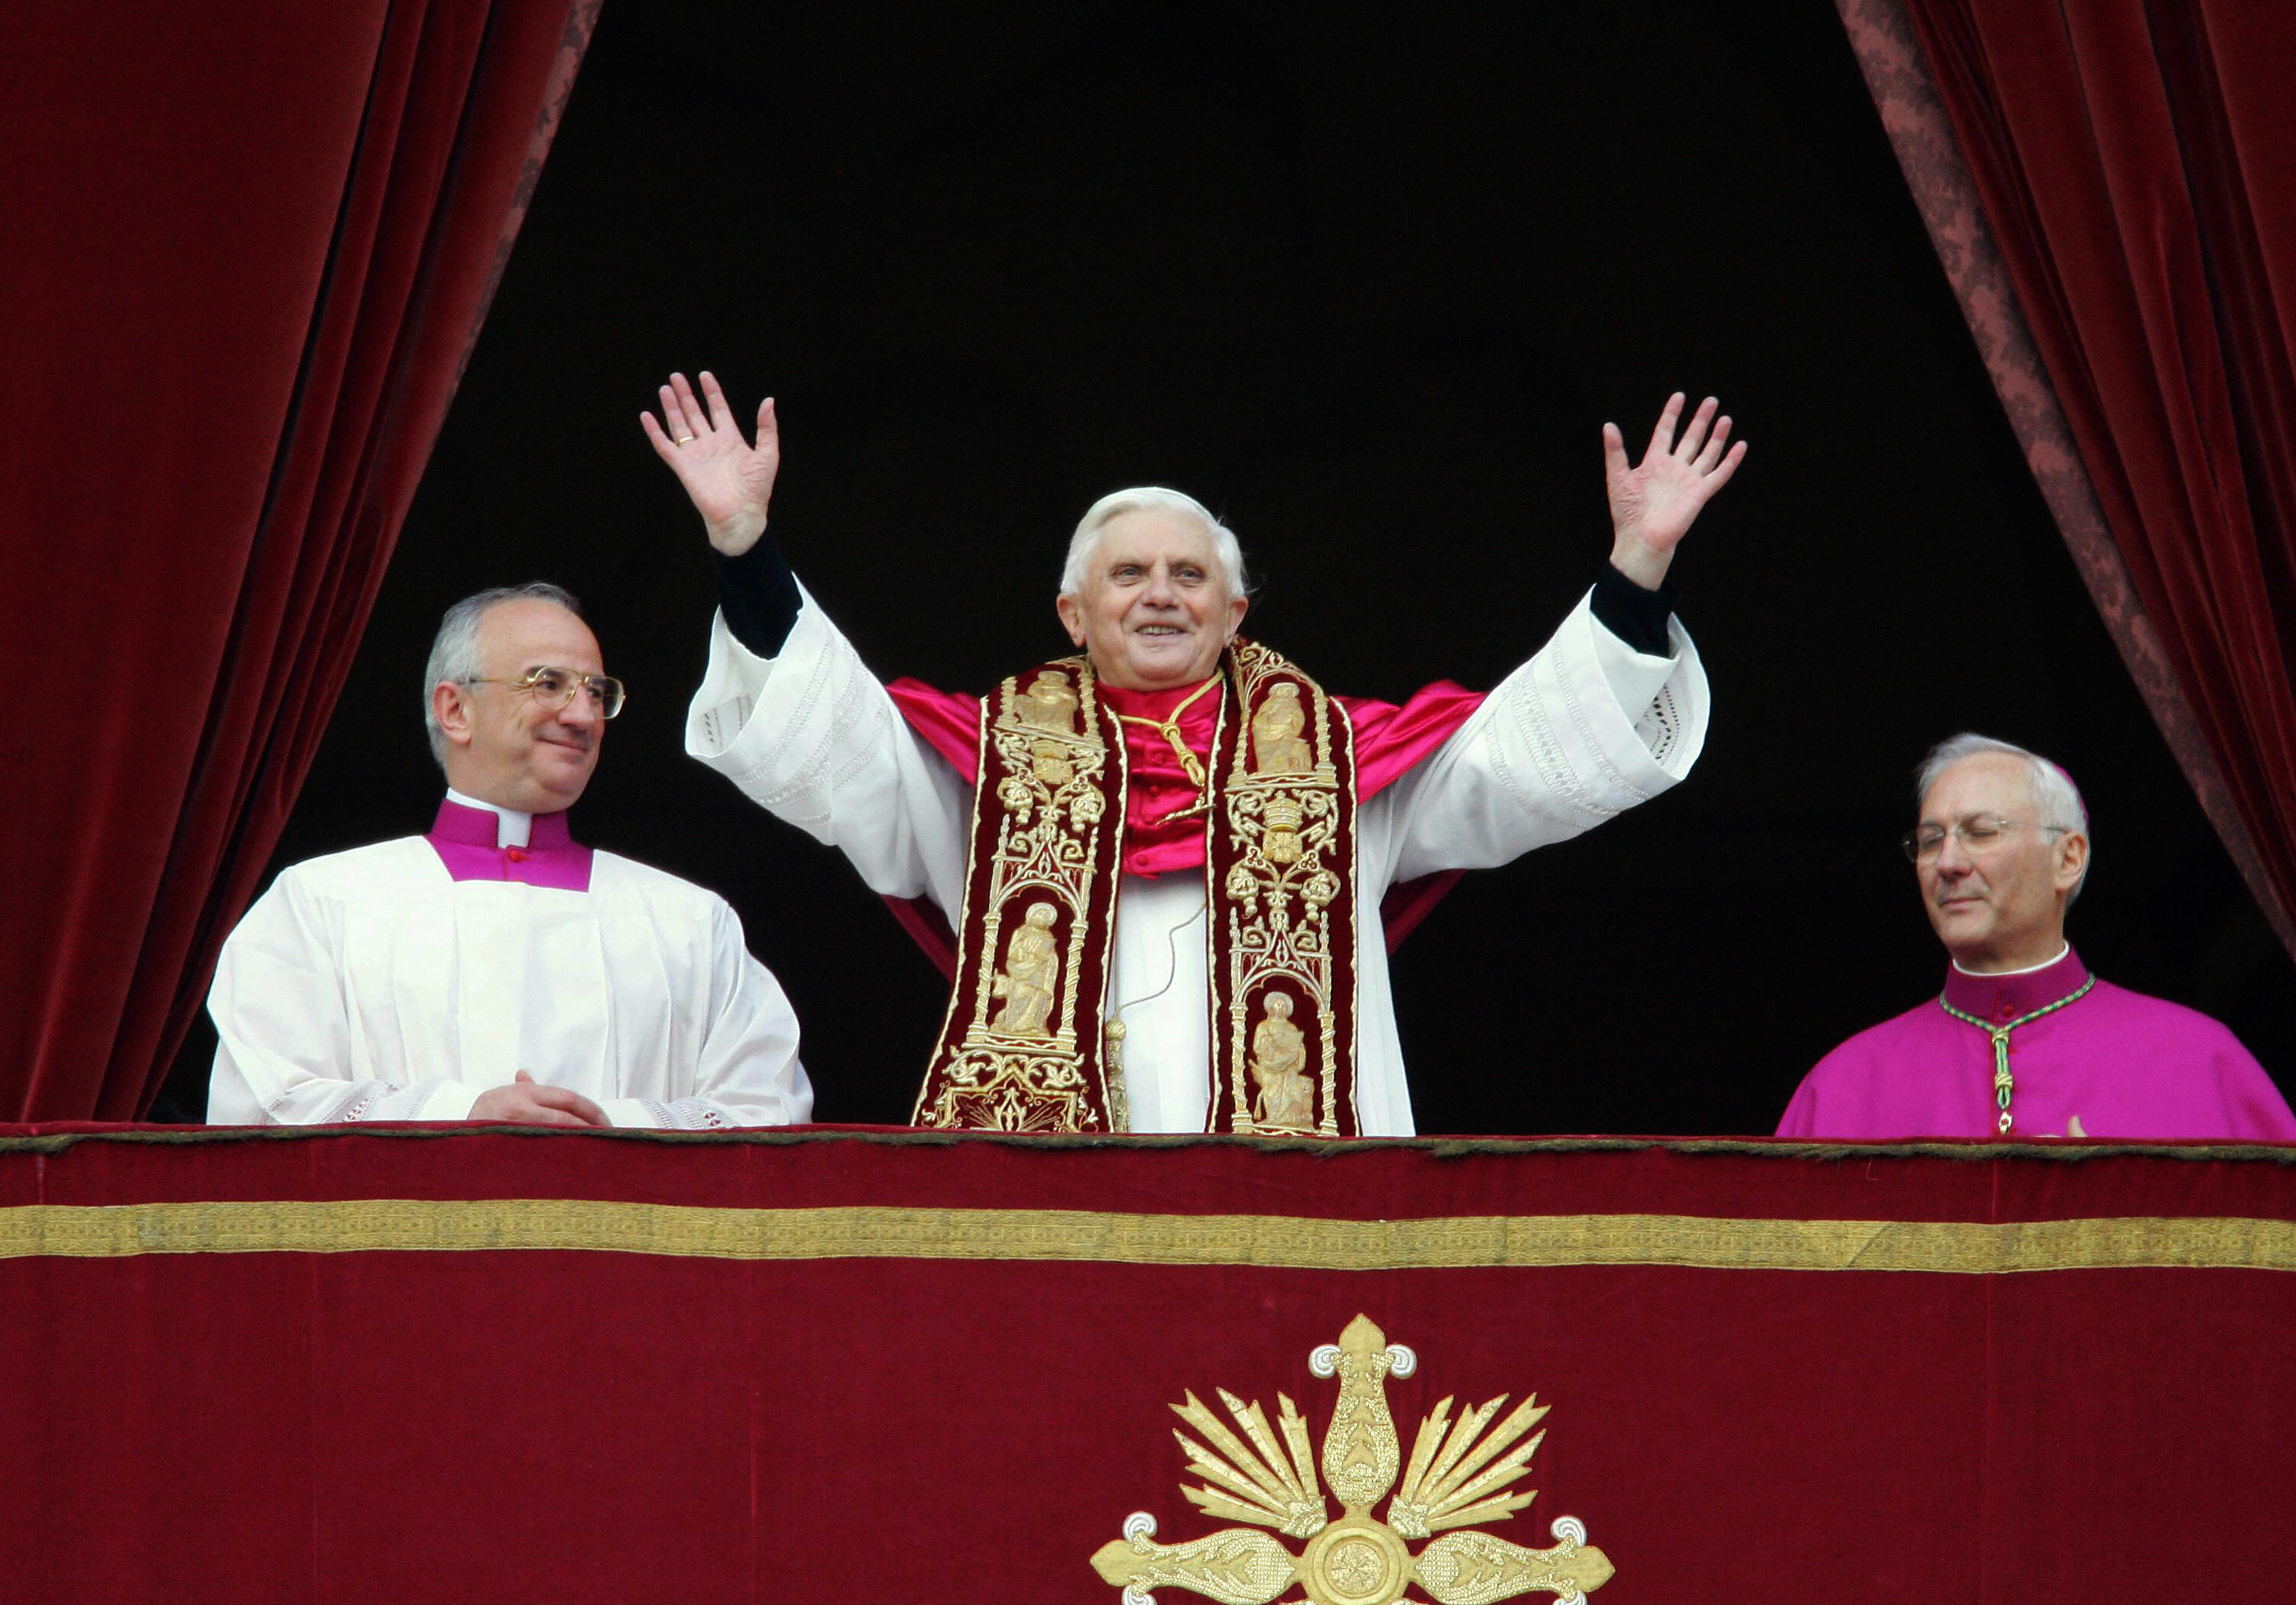 Germany's Josef Ratzinger, Pope Benedict XVI appears at the window of St. Peter's Basilica.  The main balcony of St. Peter's Basilica, Vatican City, April 19, 2005.